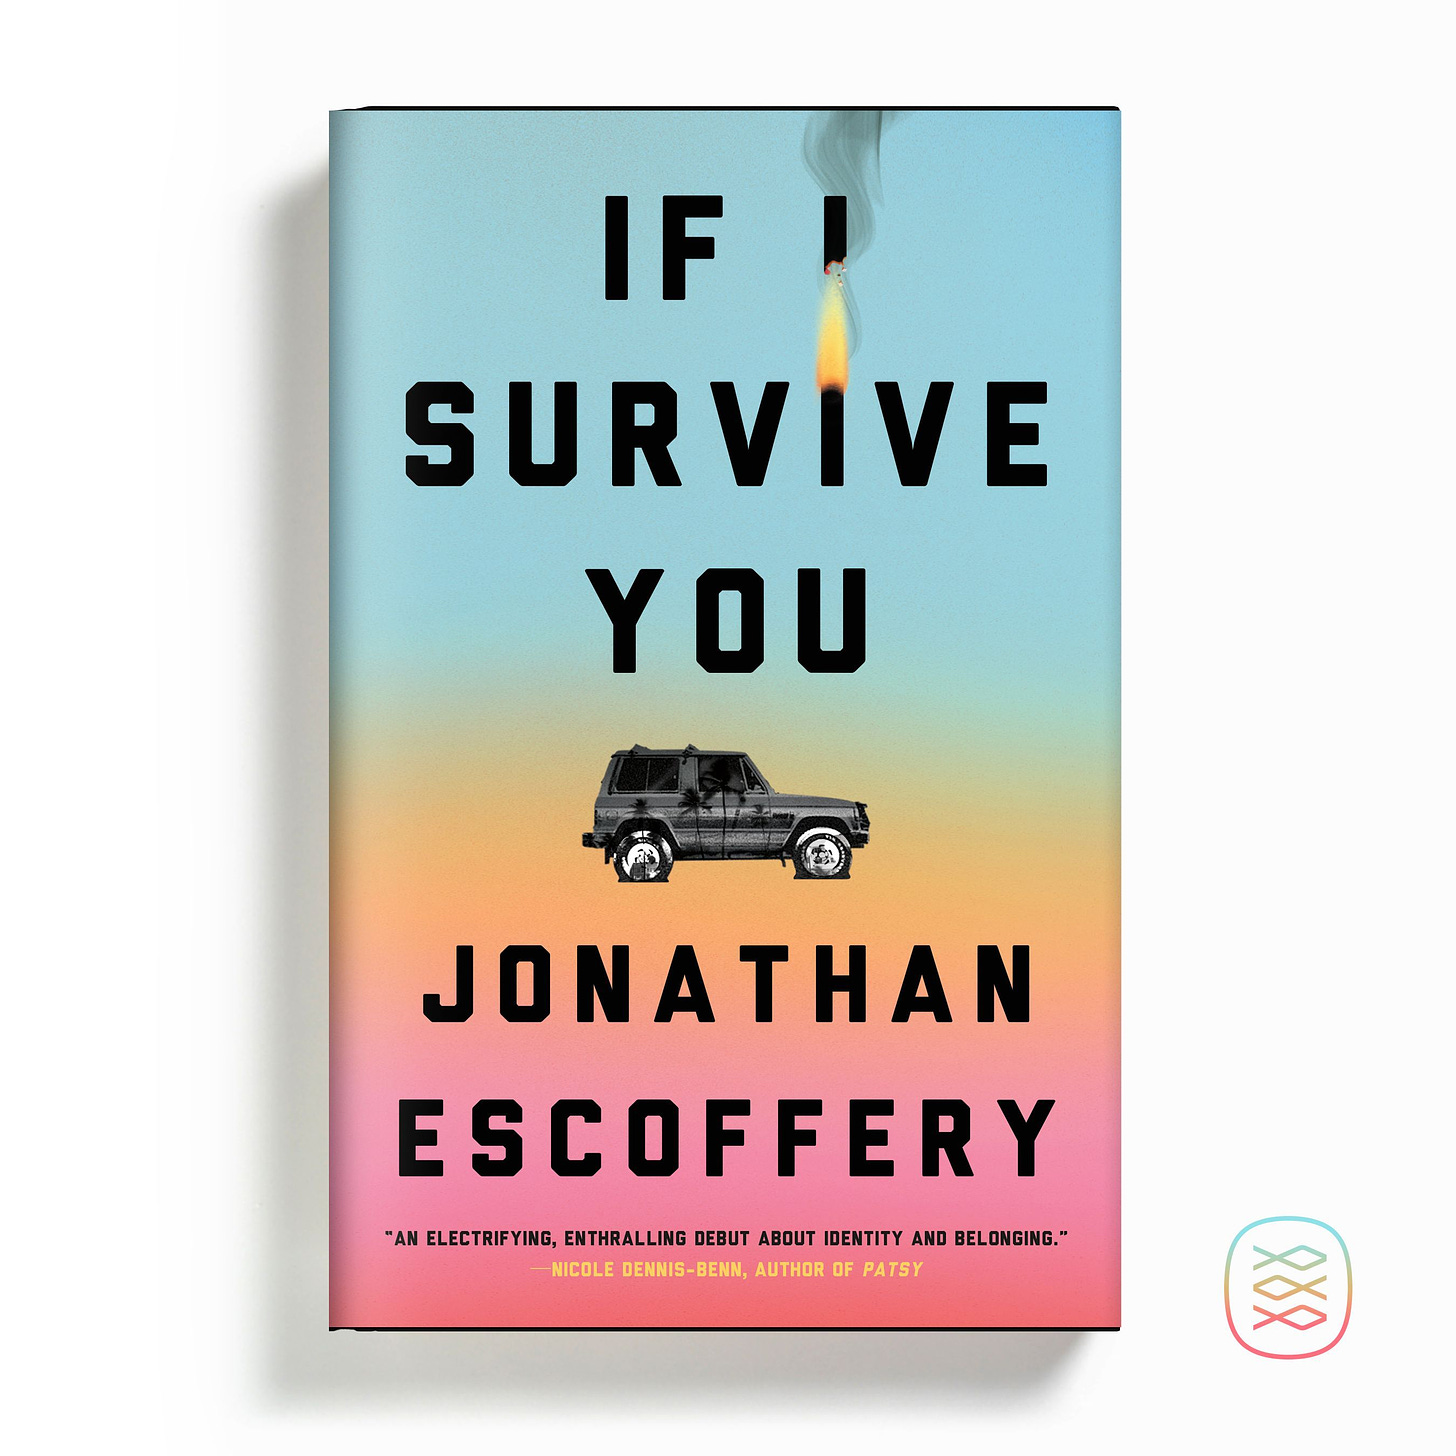 Jonathan Escoffery's “If I Survive You” Cover Reveal